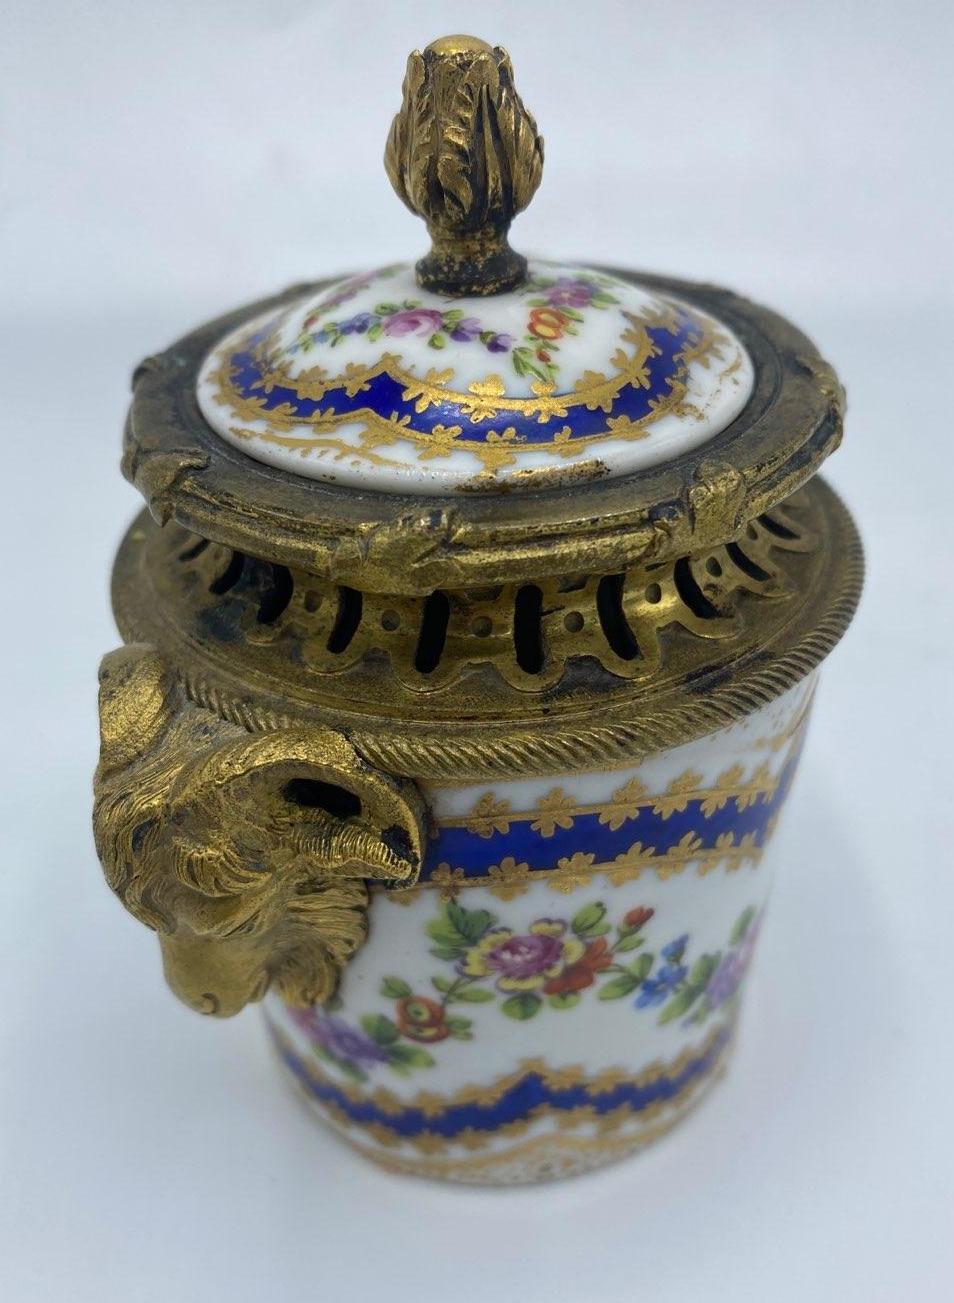 Late 19th Century Sevres French Floral Painted Porcelain Inkwell 
Lovely little porcelain piece painting with a floral design in pinks, purples and greens accented with blue and gold gilt paint. Marked on bottom. In excellent condition. France,